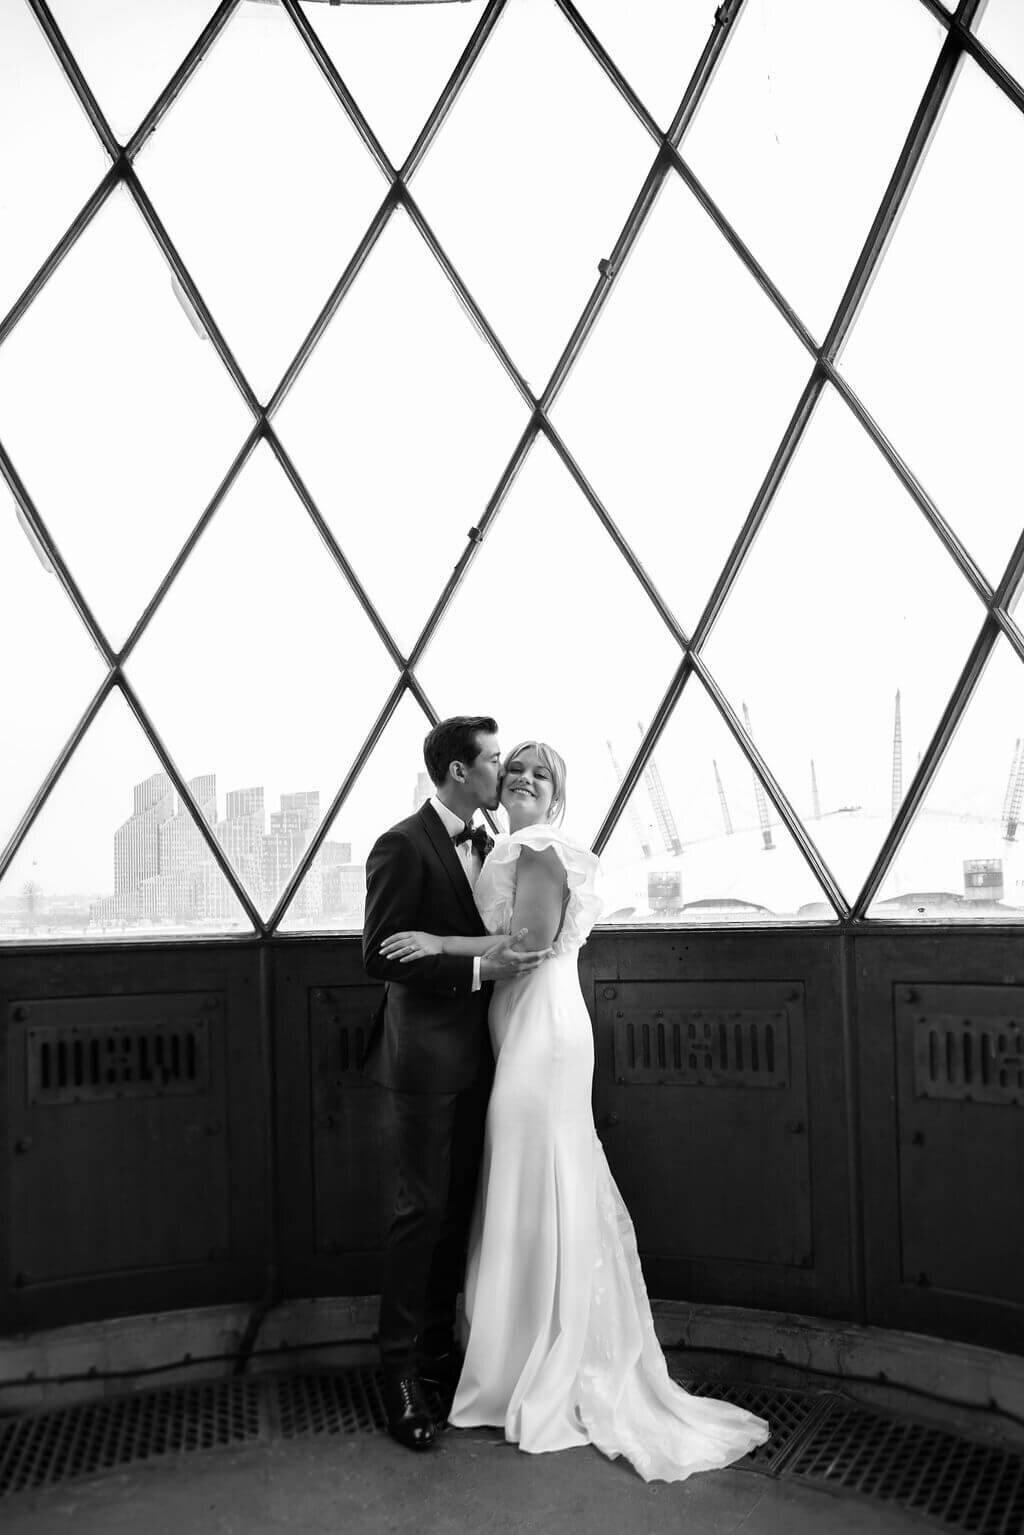 Bride and Groom, in Trinity Buoy Wharf lighthouse .  Bride laughing